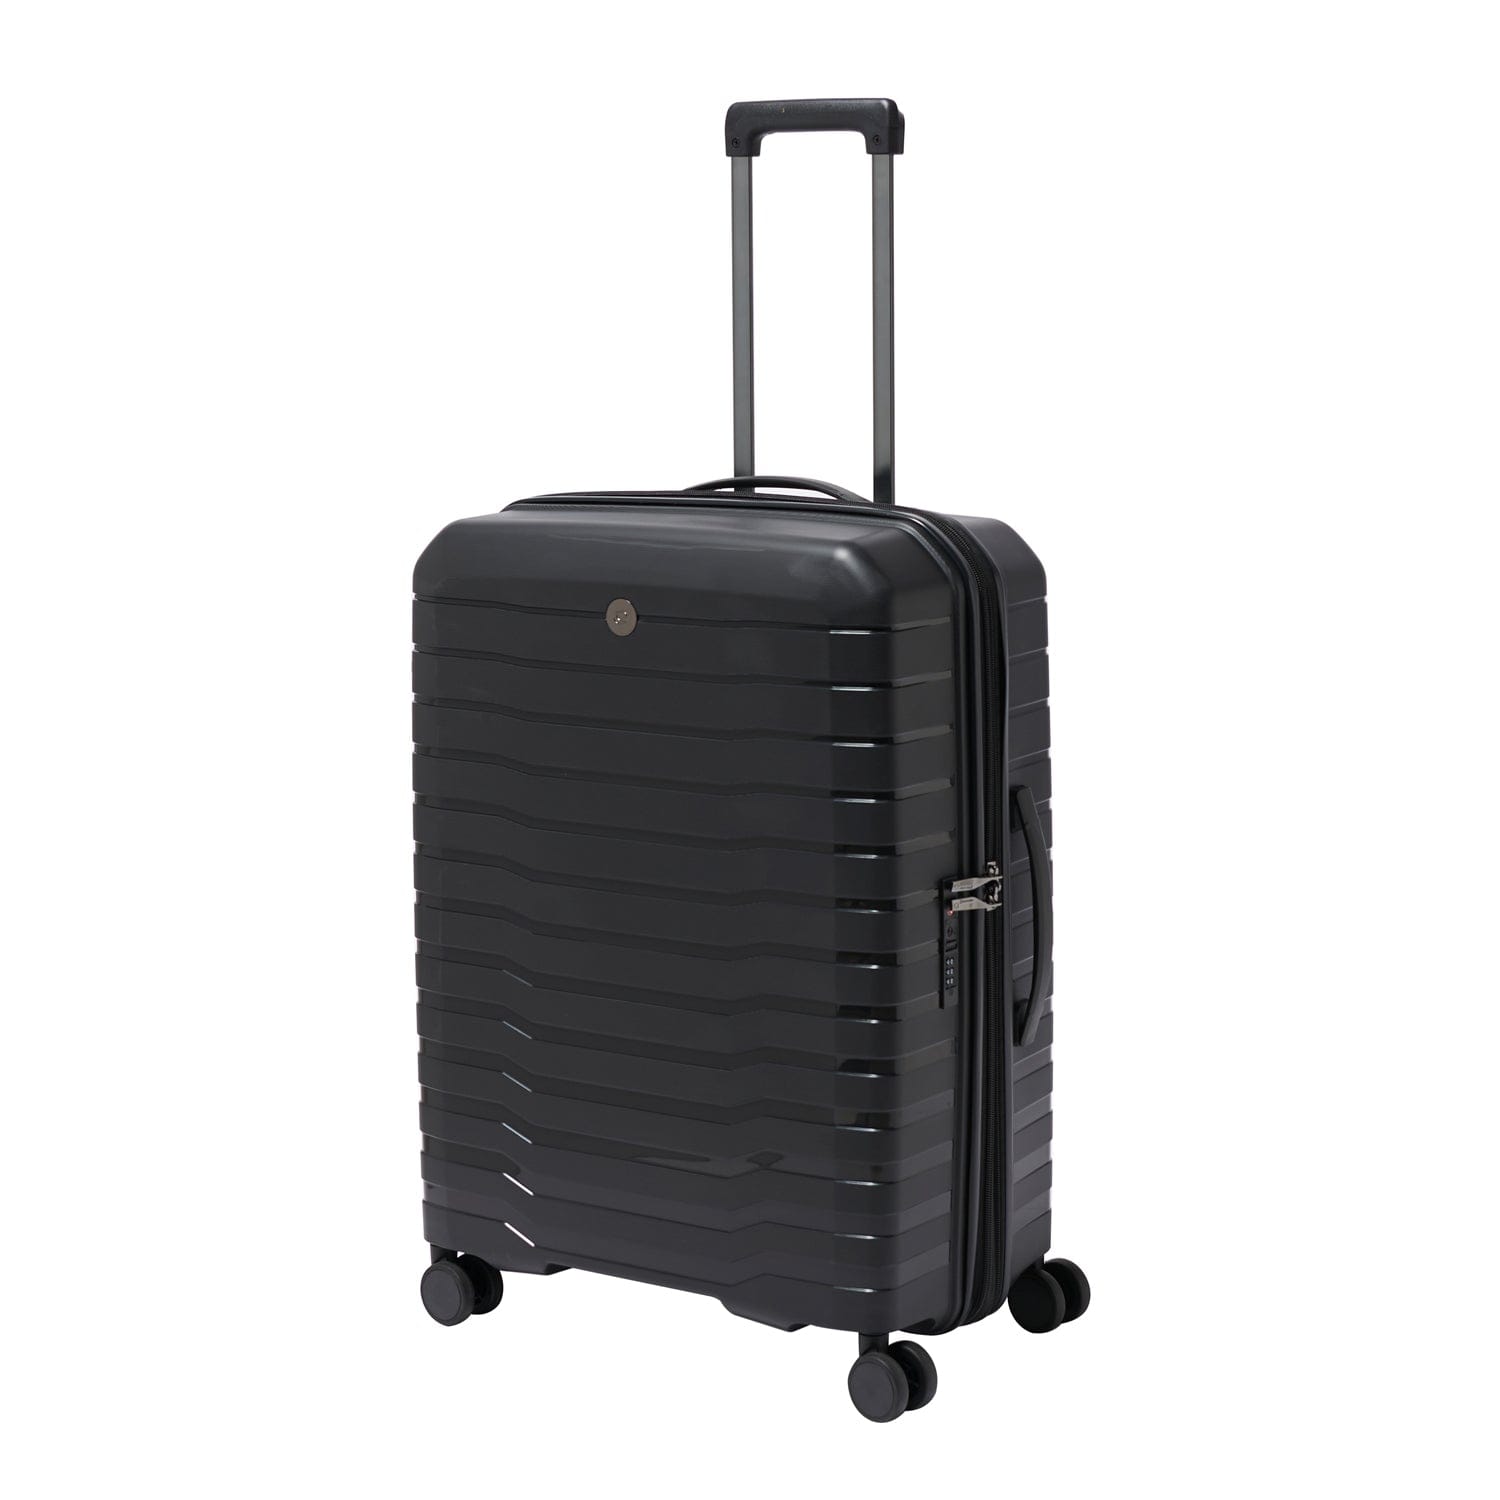 Echolac Lordnorth 68cm Hardcase Expandable 4 Double Wheel Check-In Luggage Trolley Black - PPT008 - 24 BLACK